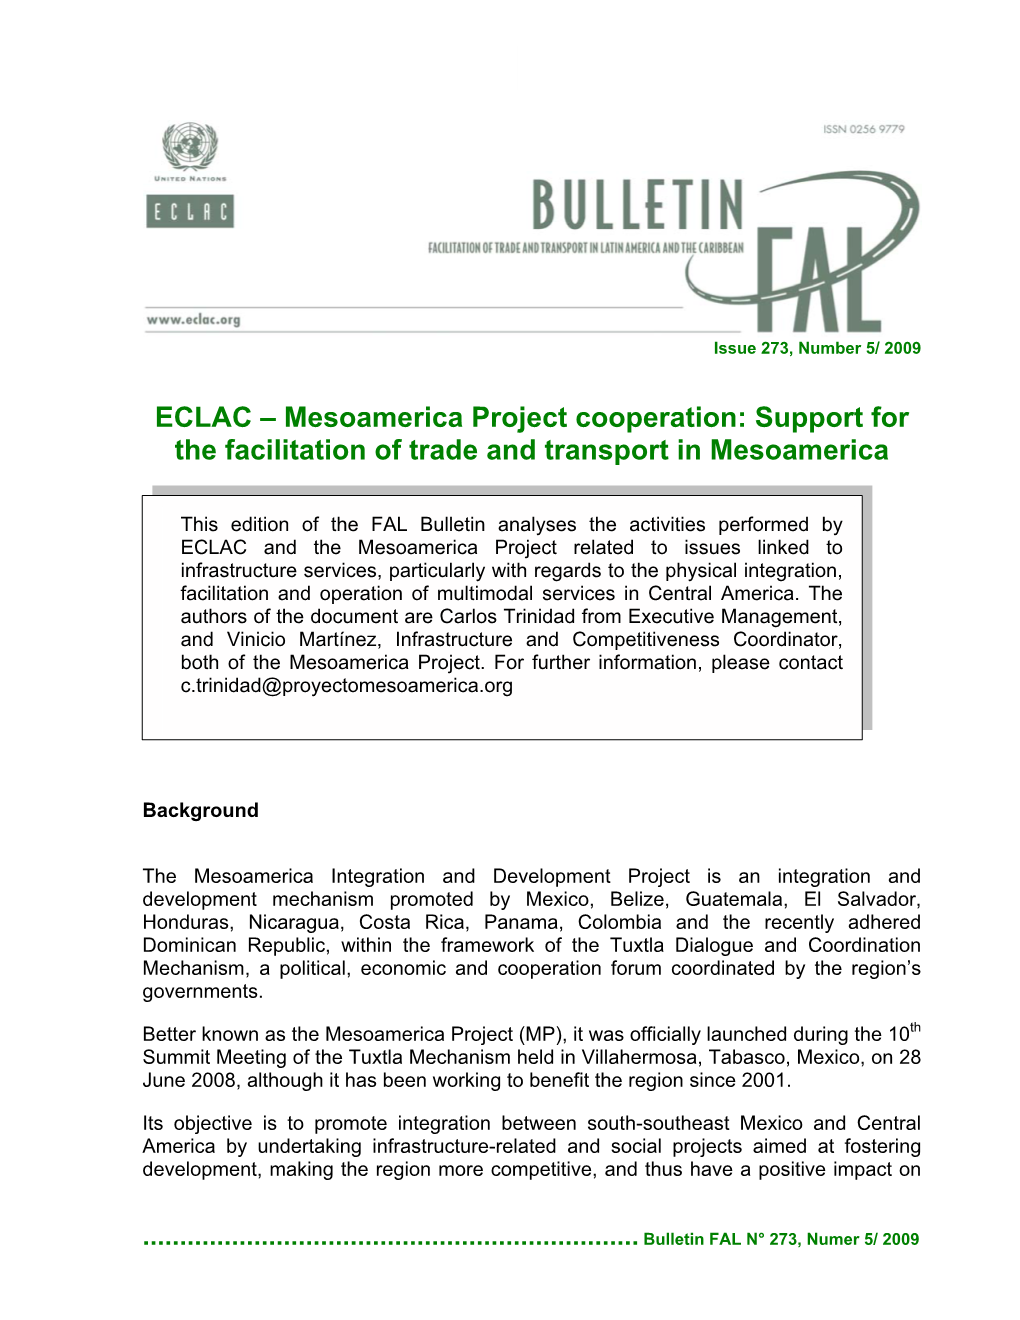 ECLAC – Mesoamerica Project Cooperation: Support for the Facilitation of Trade and Transport in Mesoamerica